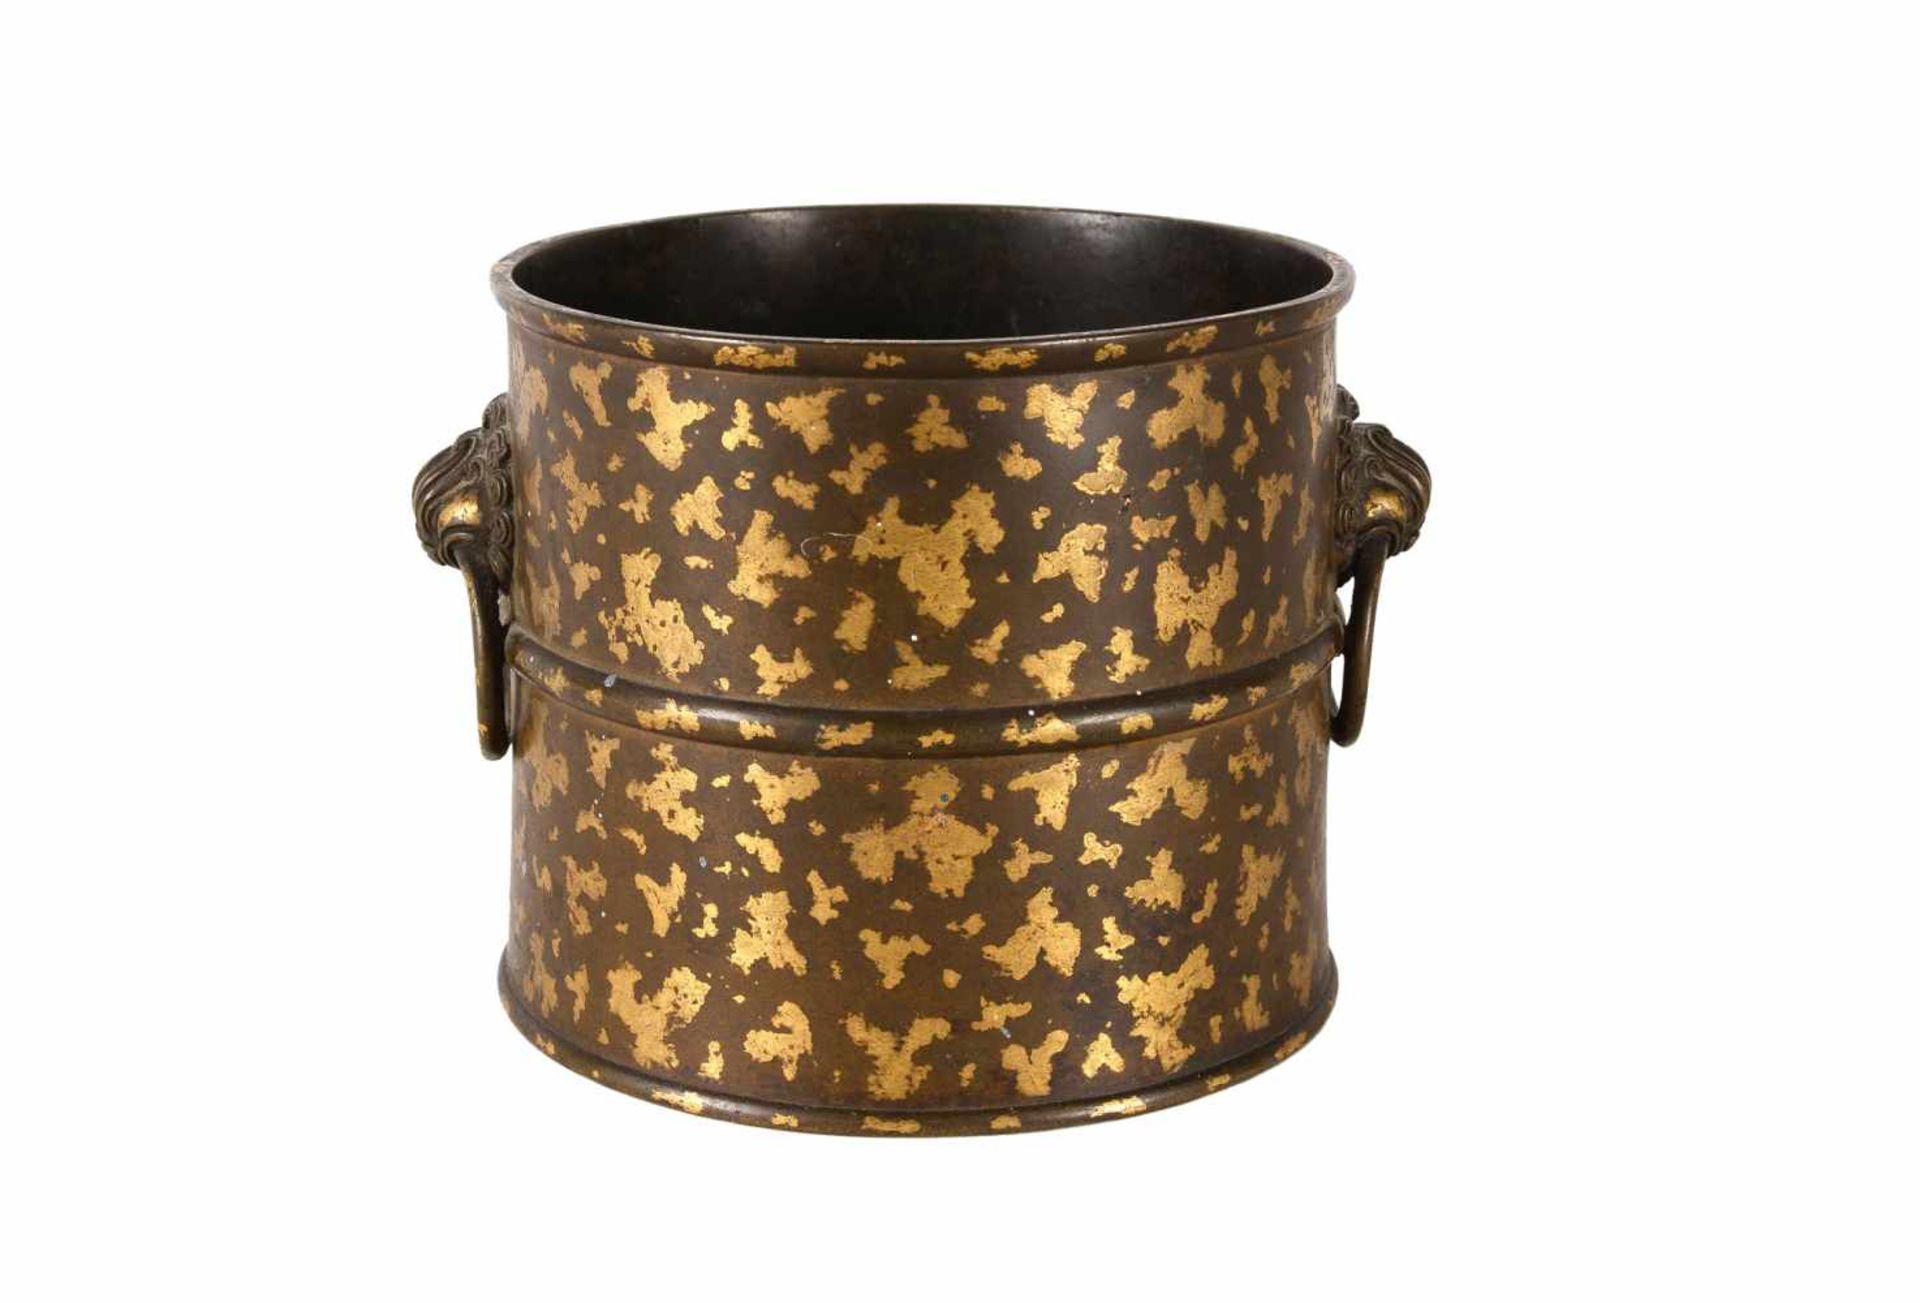 Bronze brush pot with splashes. Marked with seal mark Xuande. China, 18th century. H. 12,5 cm. Diam.